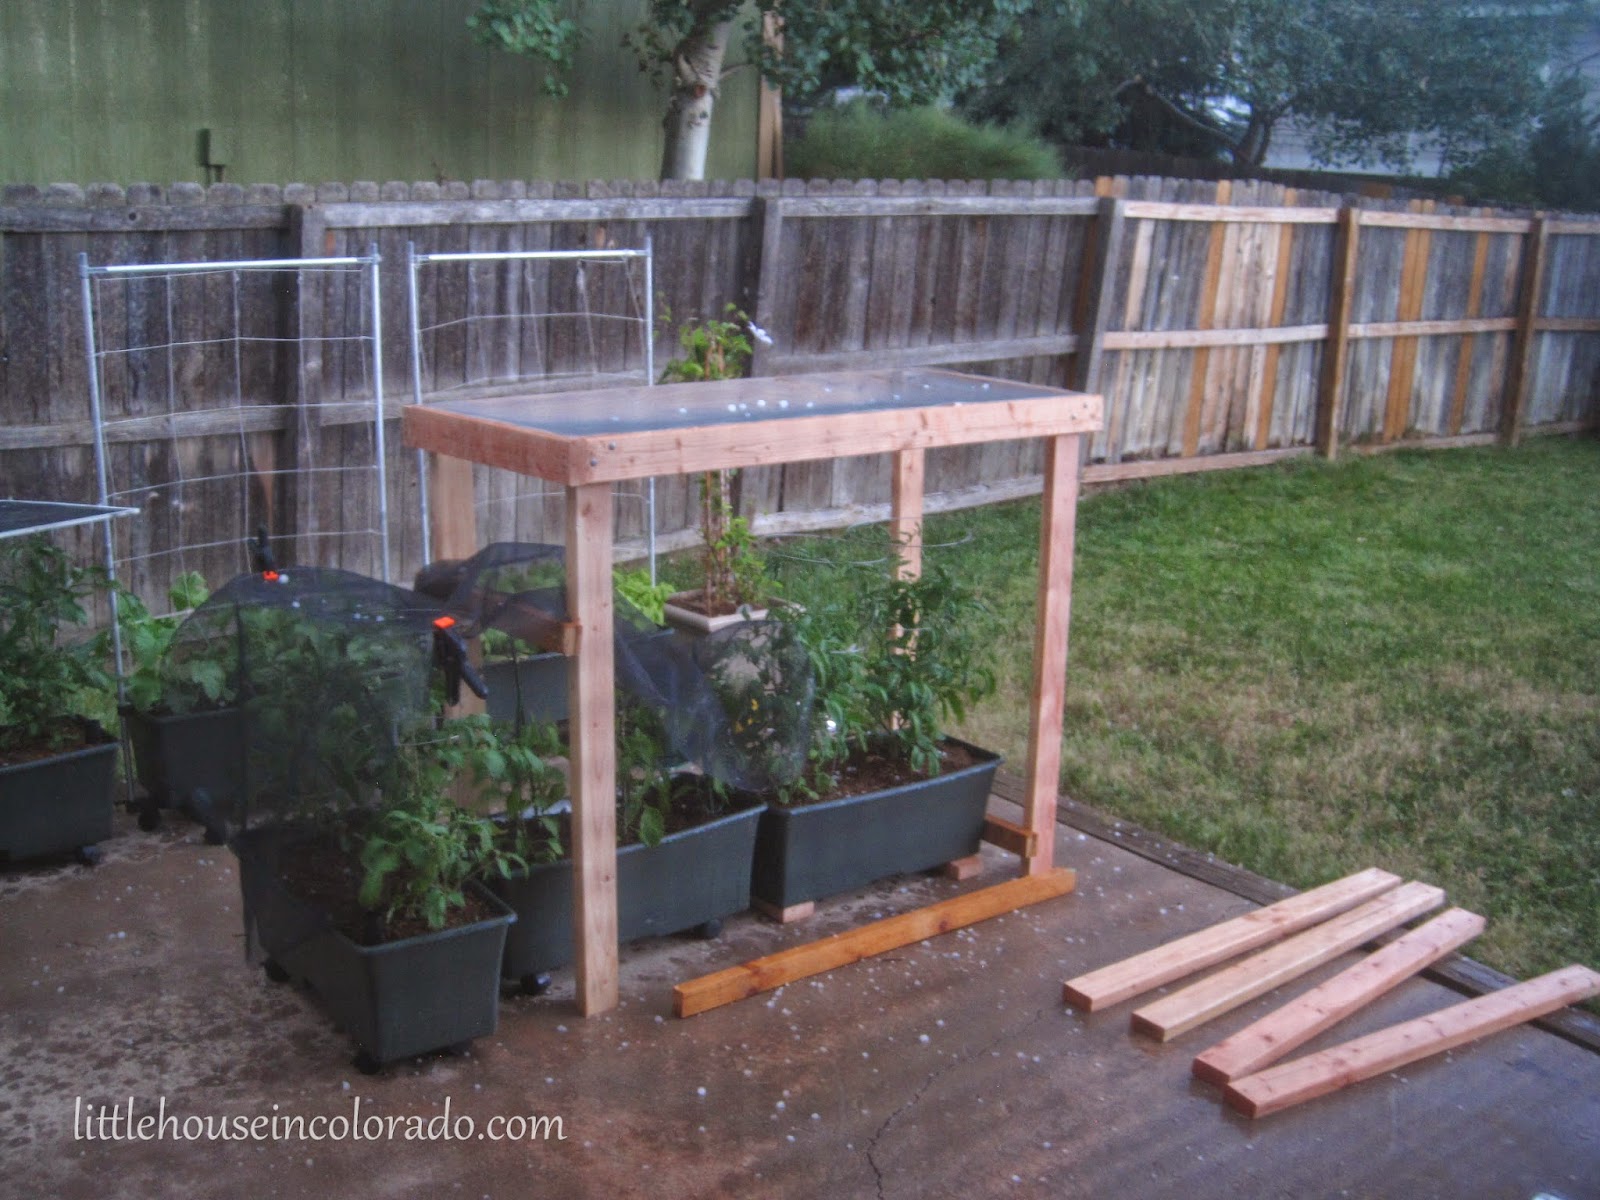 How To Protect Garden From Hail - Garden Ftempo